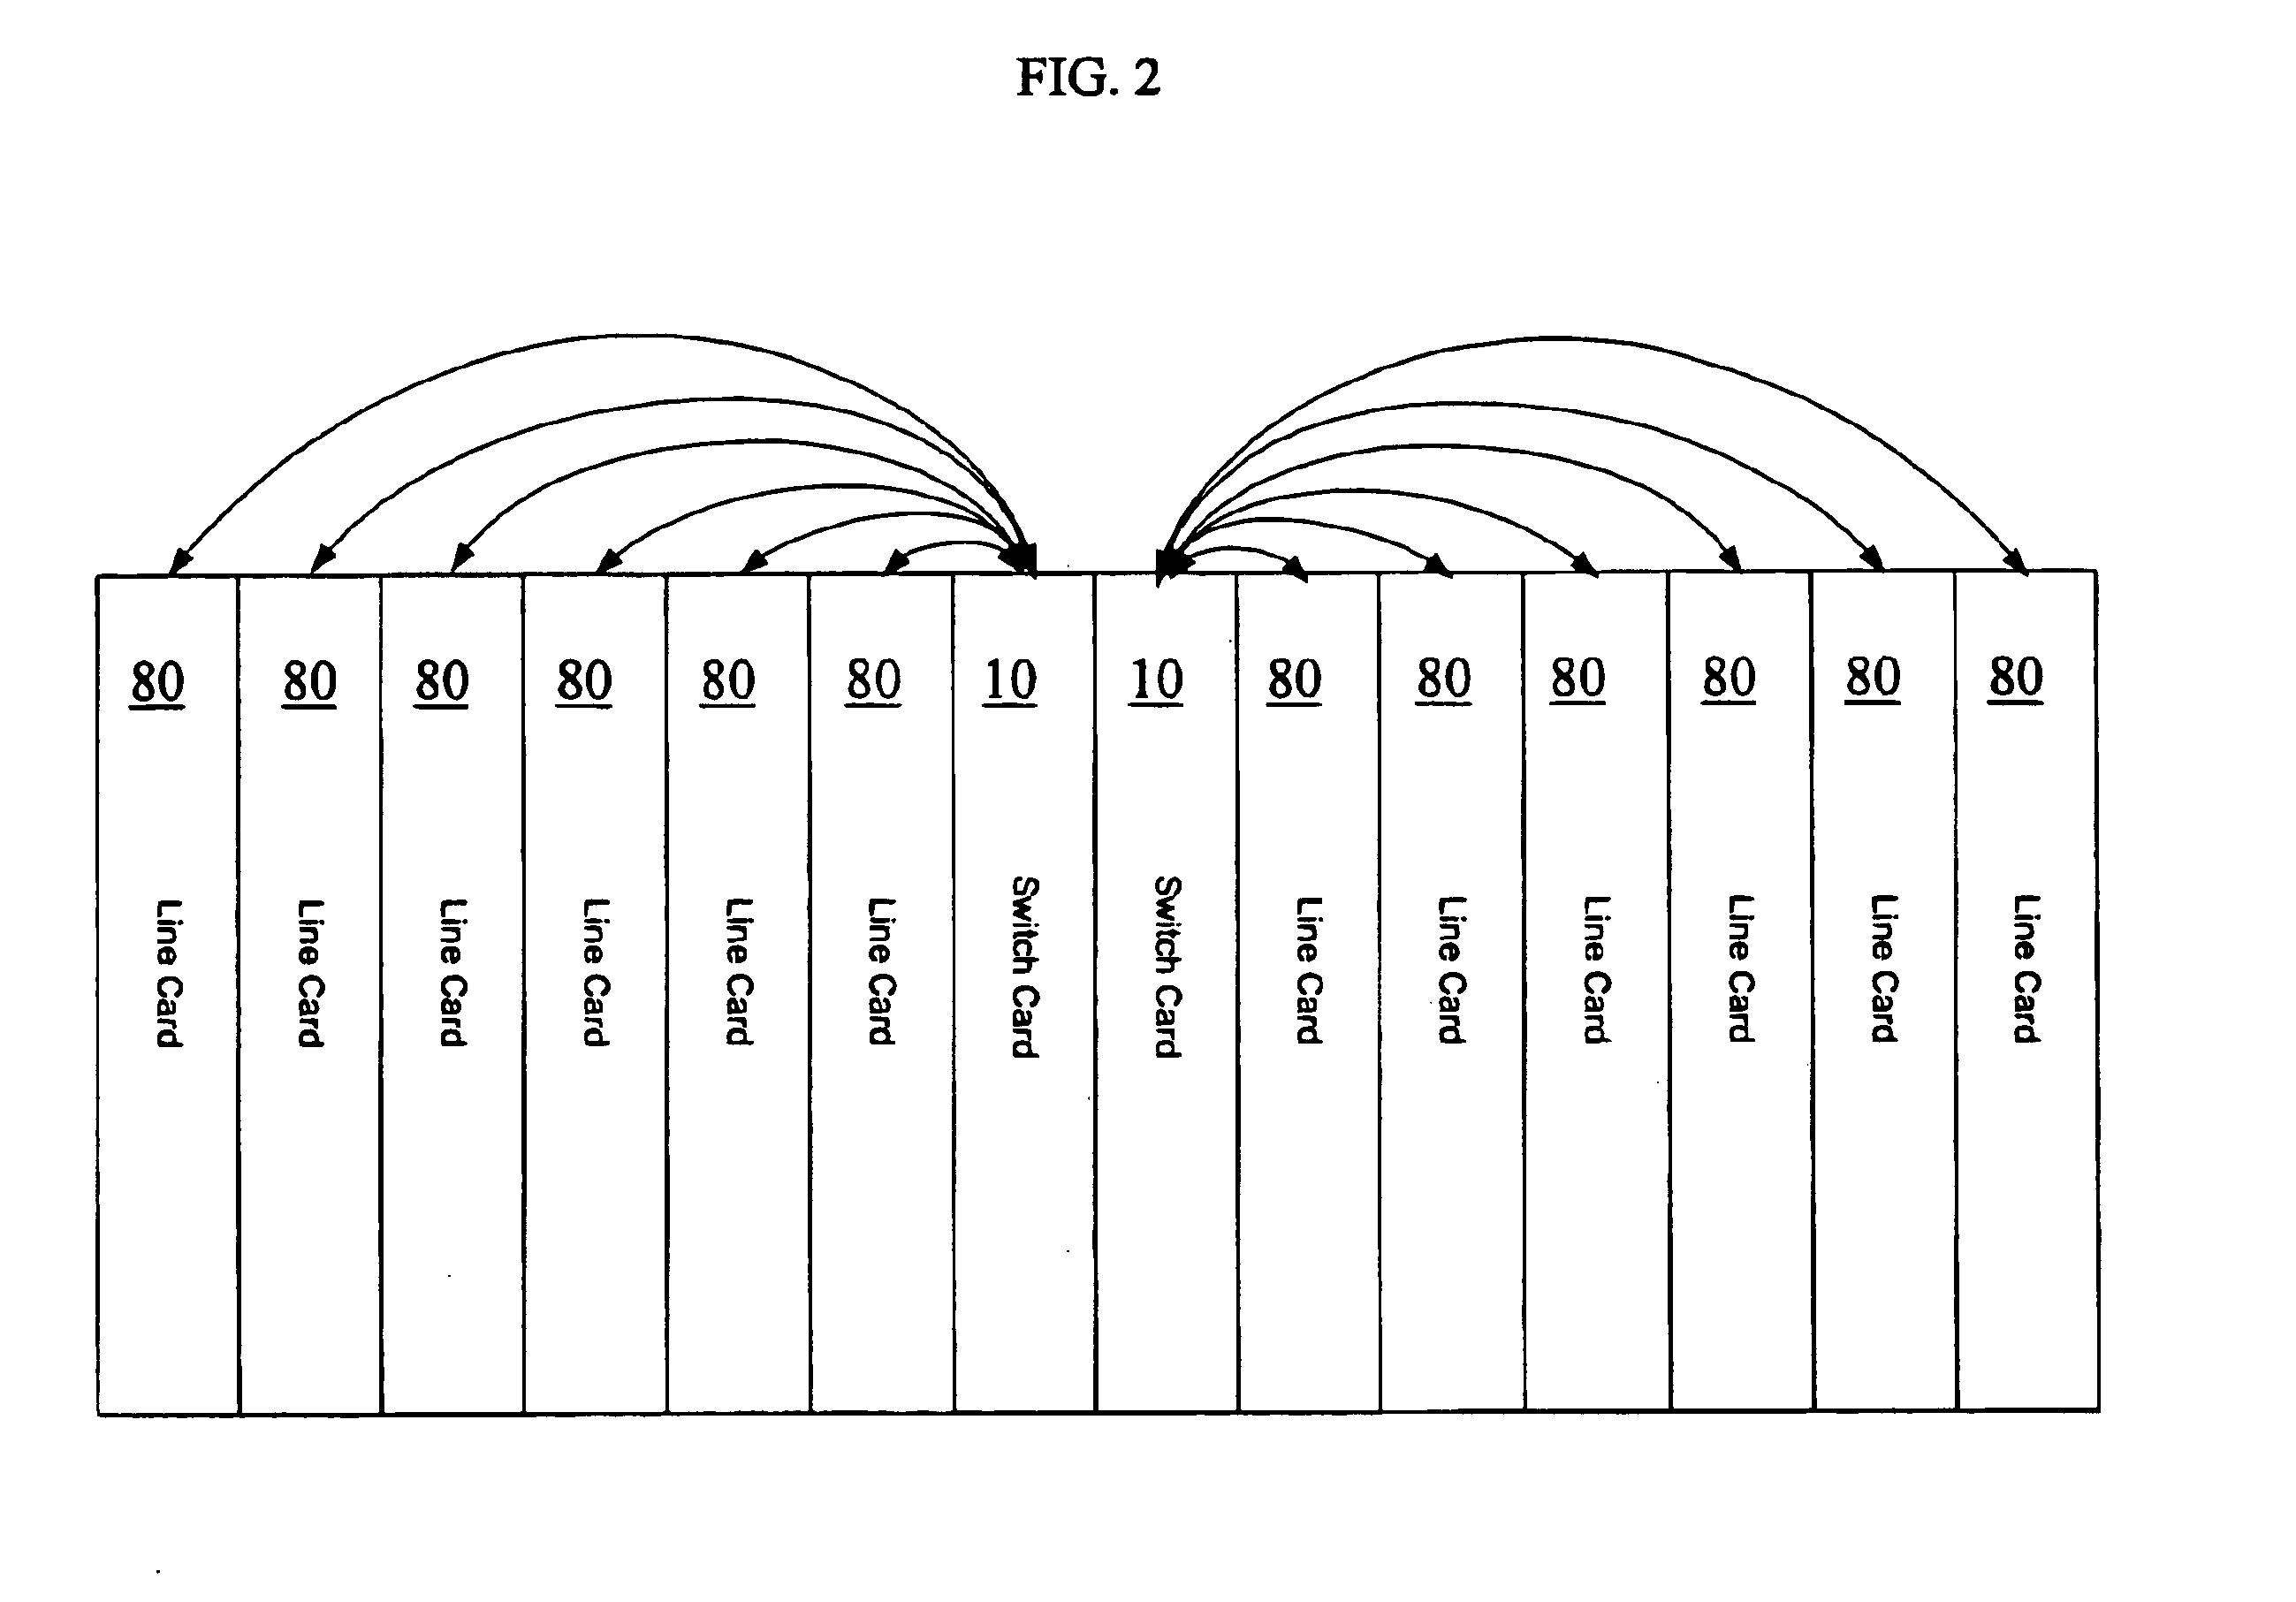 Reconfigurable data communications system with a removable optical backplane connector